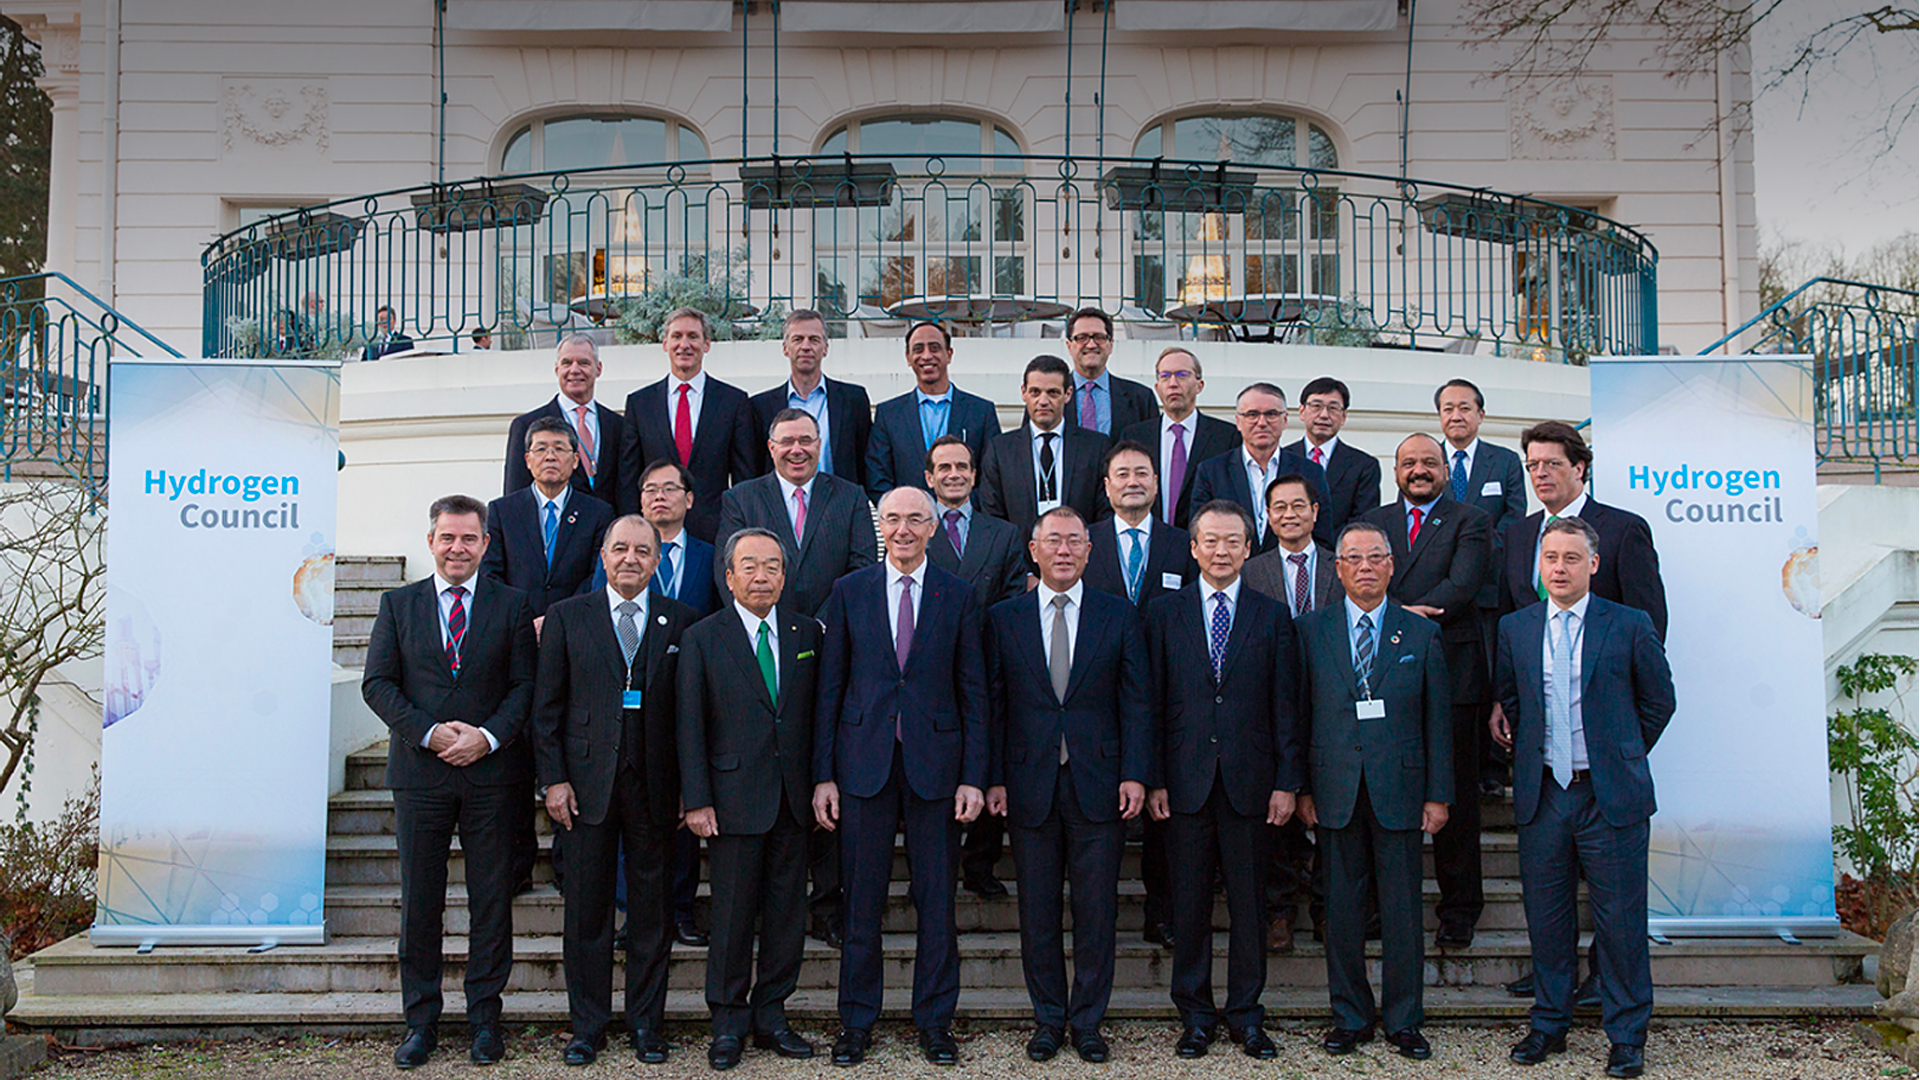 Hyundai Motor Group Executive Vice Chairman Chung Euisun (front row, fourth from right) poses with global CEOs during the Hydrogen Council’s annual CEO event in Paris on Monday. (Hyundai Motor Group)